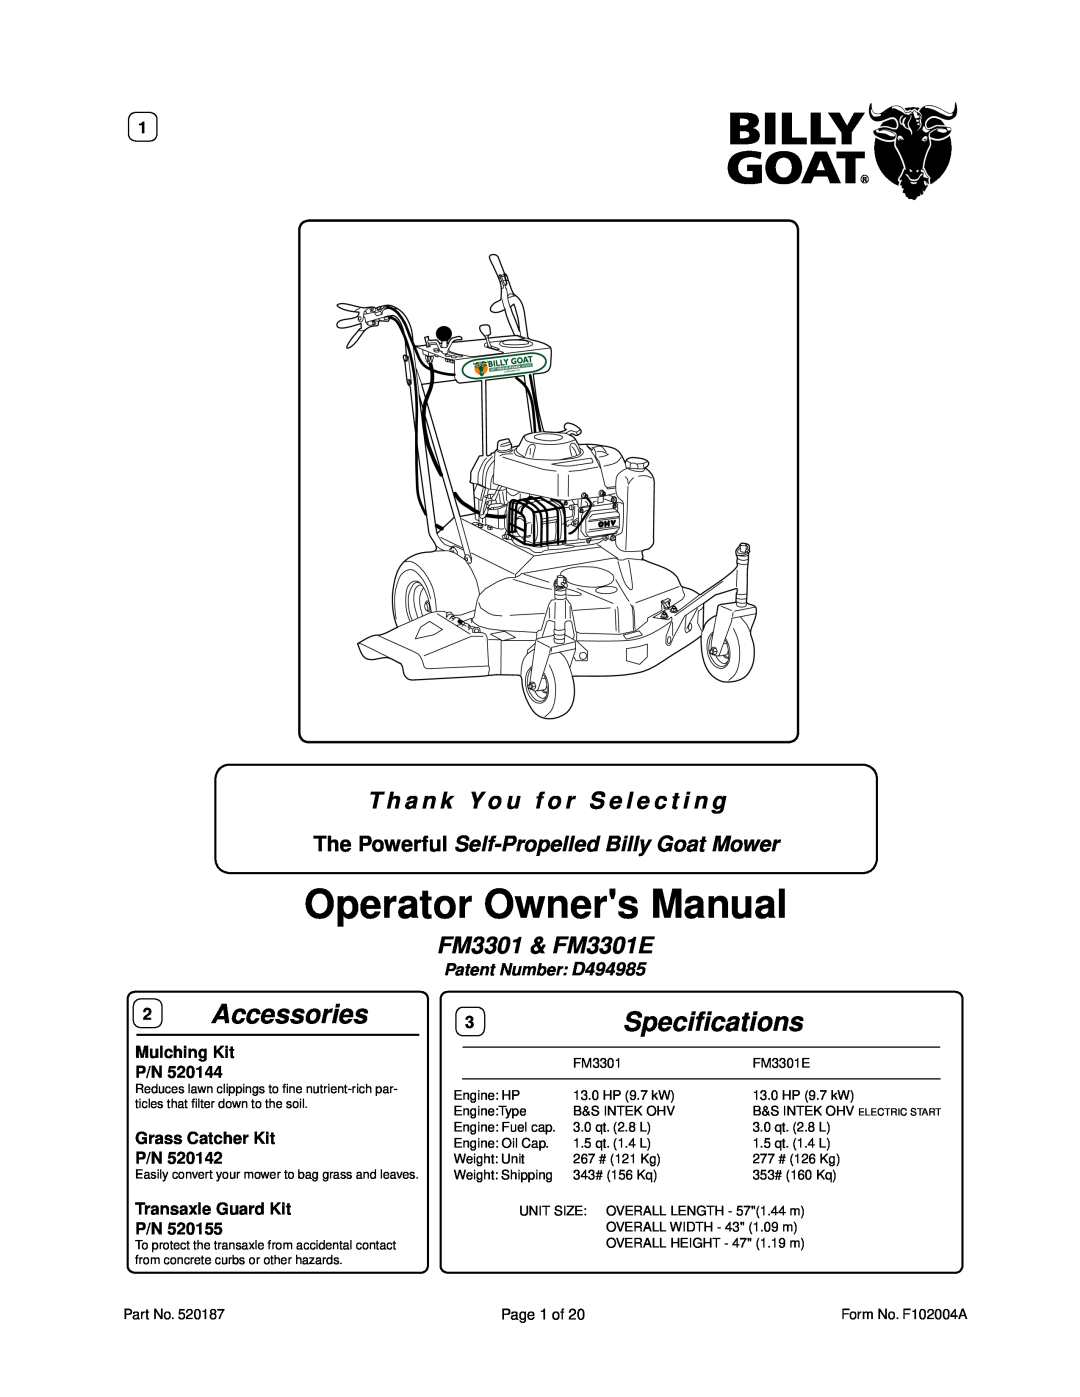 Billy Goat owner manual Accessories, Speciﬁcations, T h a n k Y o u f o r S e l e c t i n g, FM3301 & FM3301E 